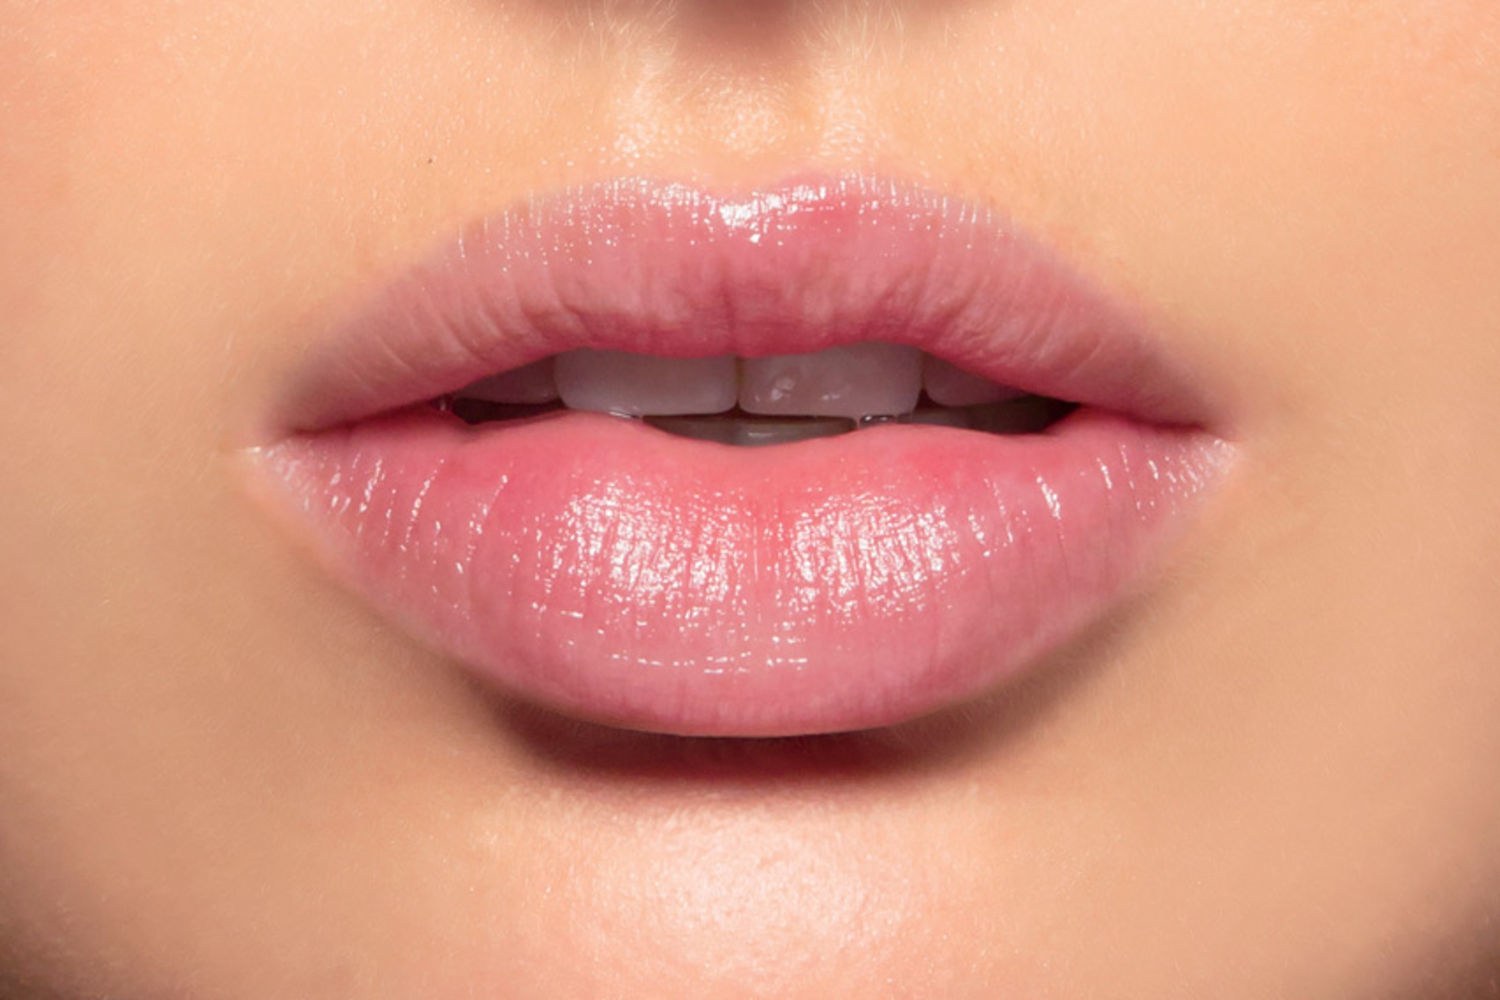 Lips images